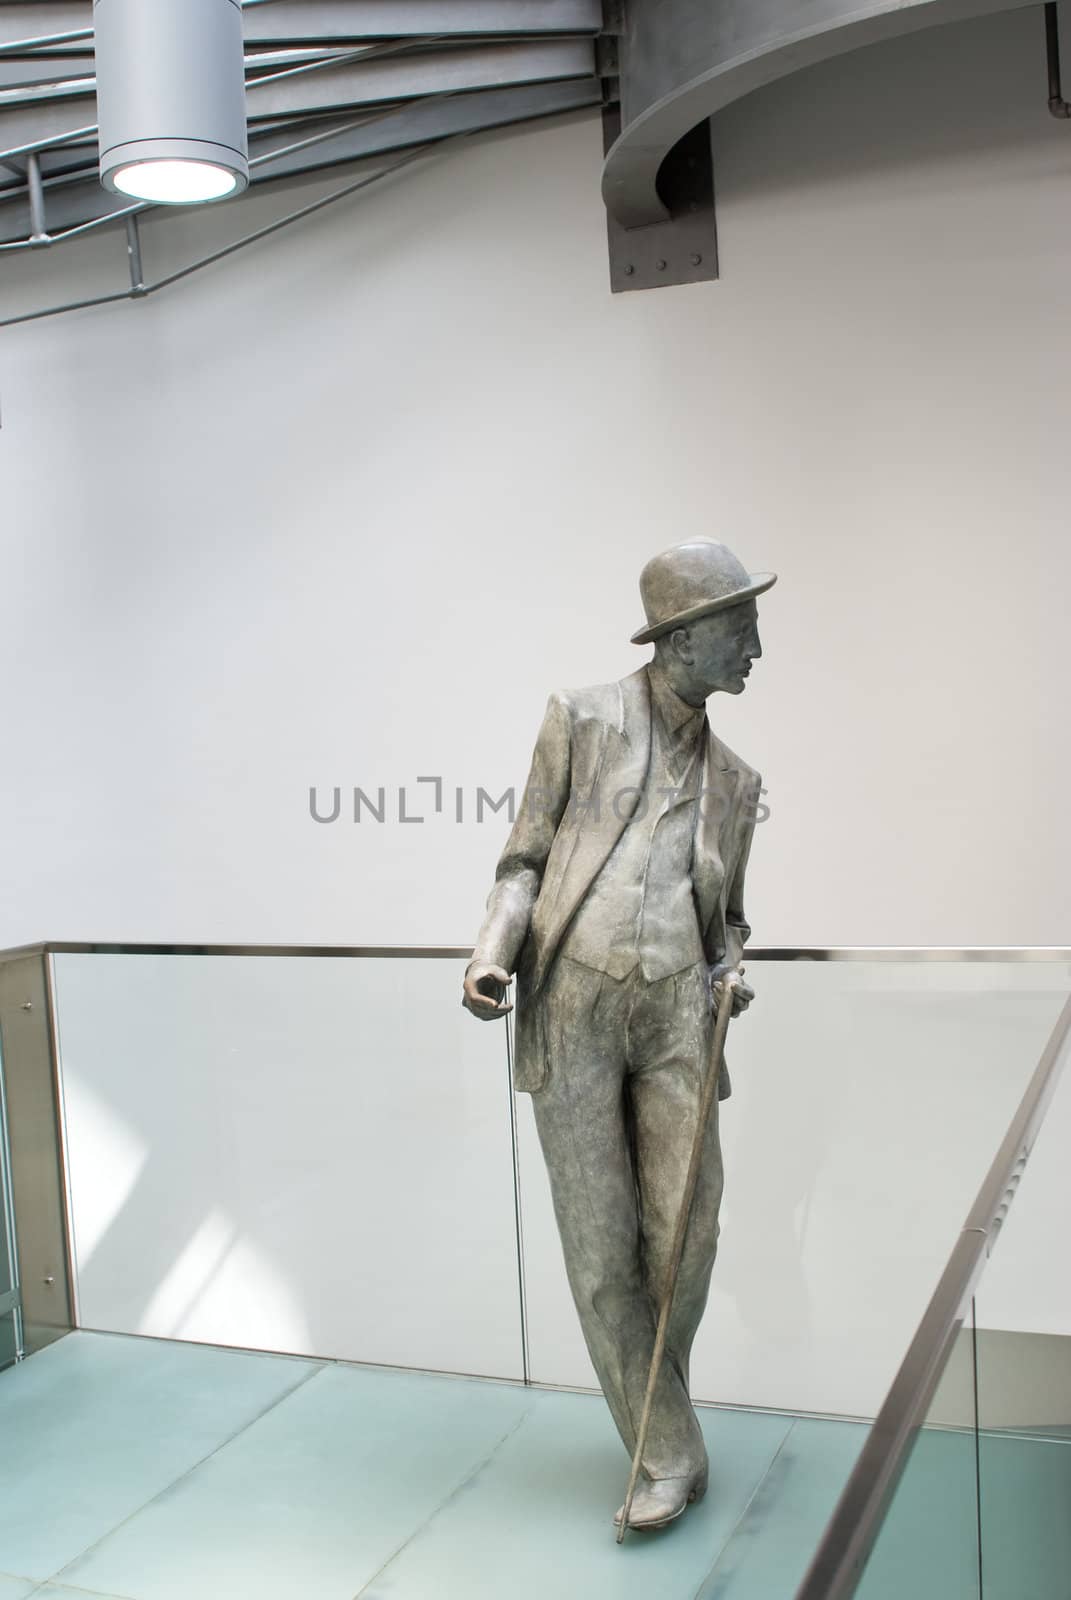 Sculpture of man in a suit and a cane